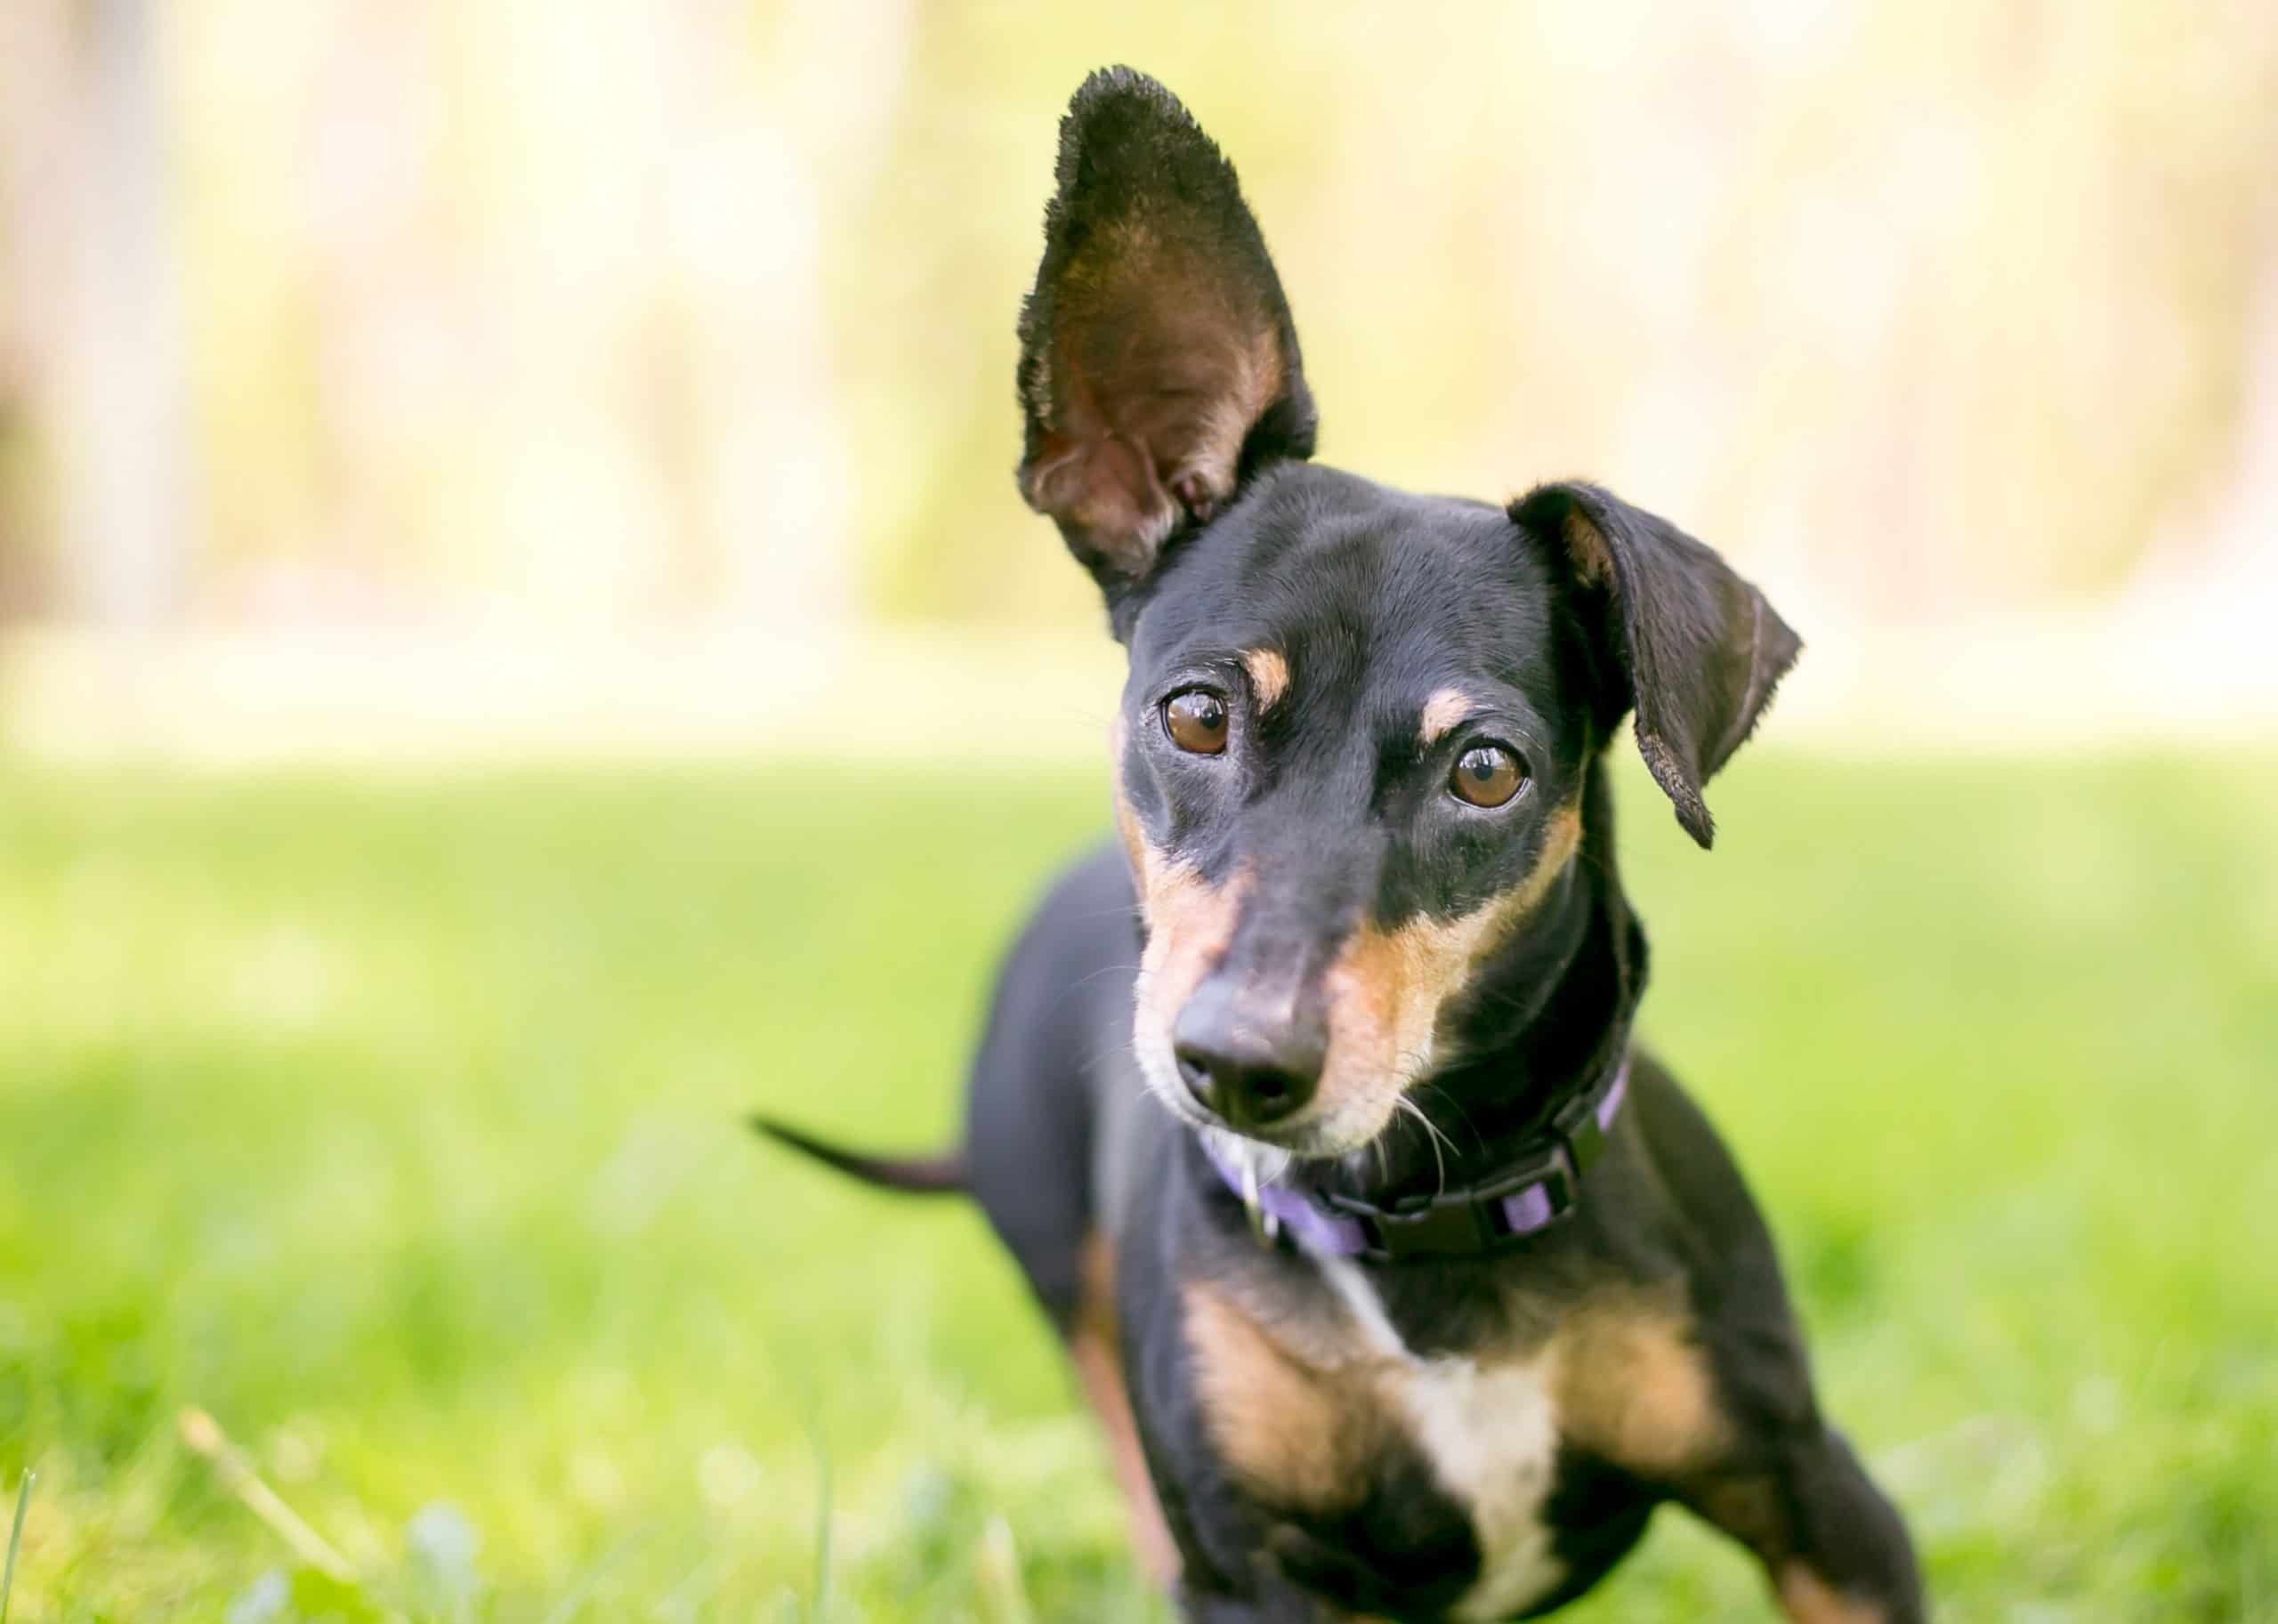 Can dogs get diarrhea from exercise?